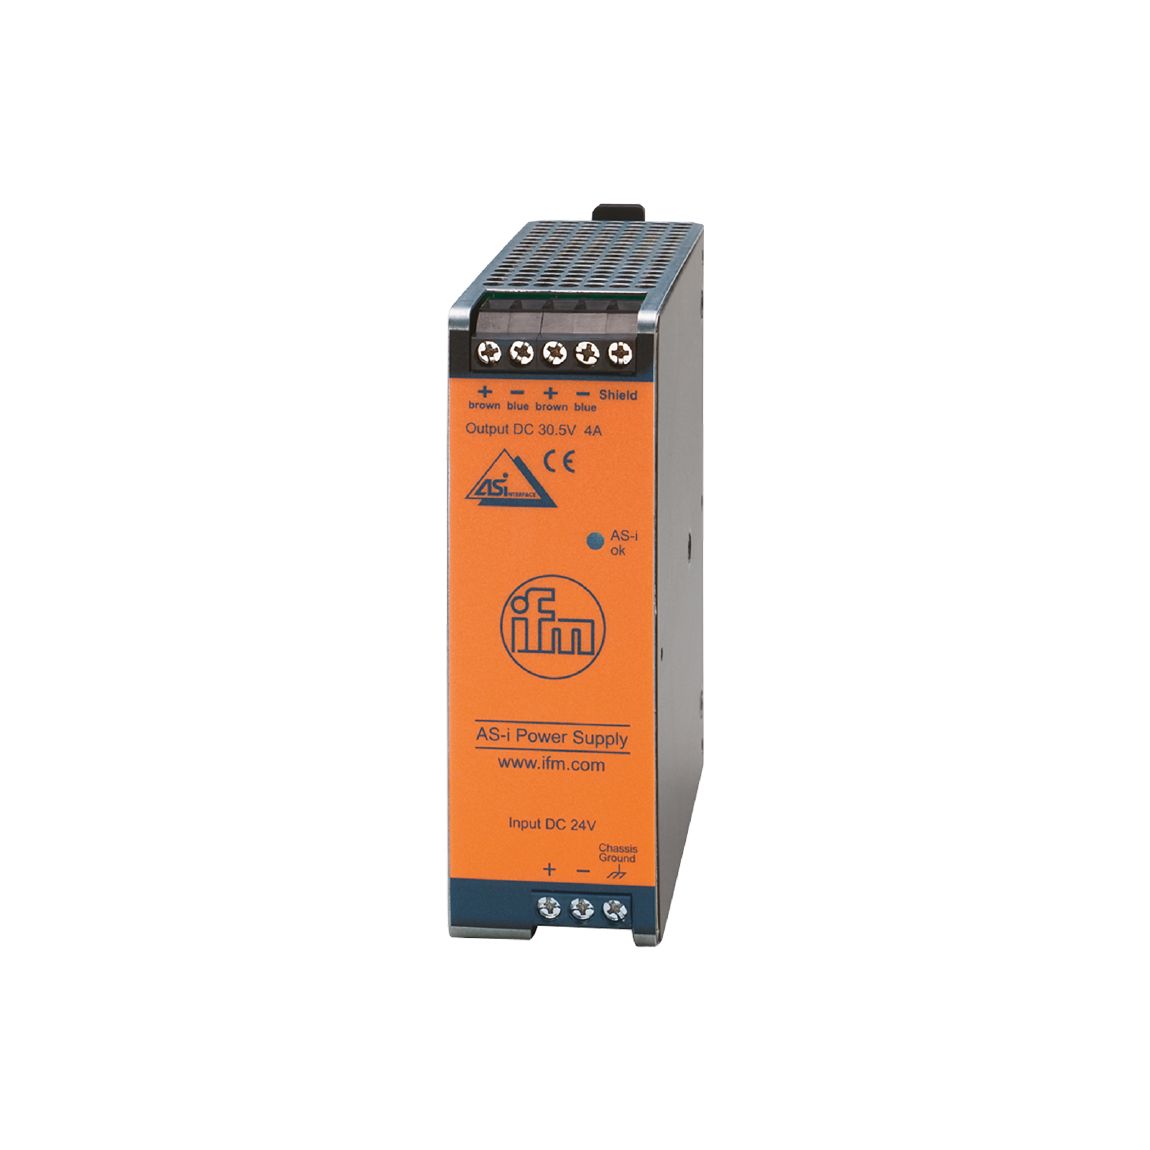 AC1257 - AS-Interface power supply - ifm